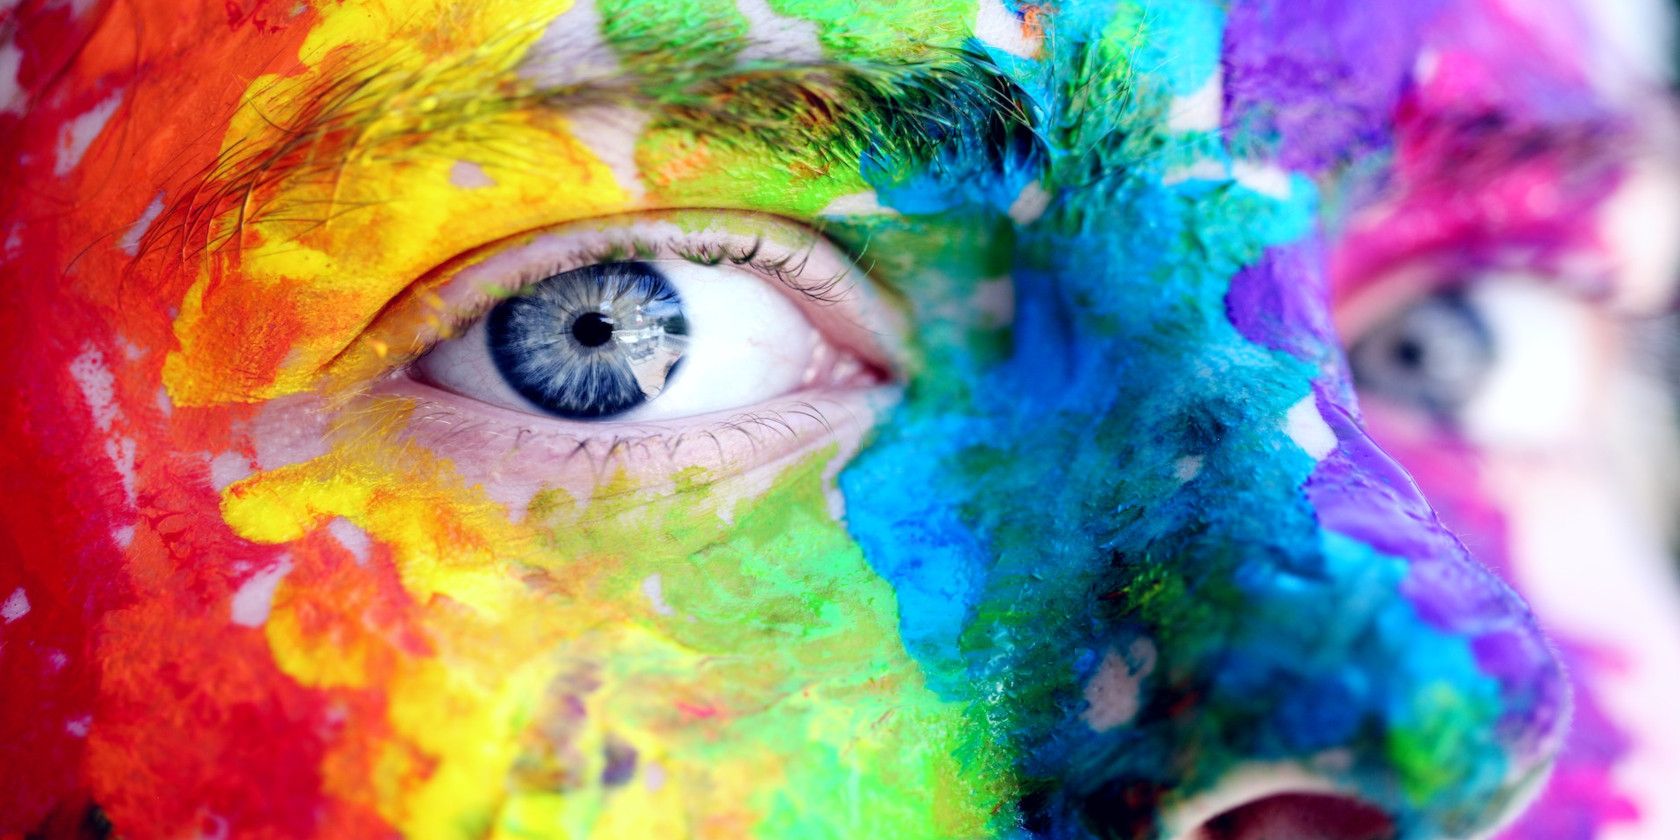 A close-up of someone's face painted in many different colors.